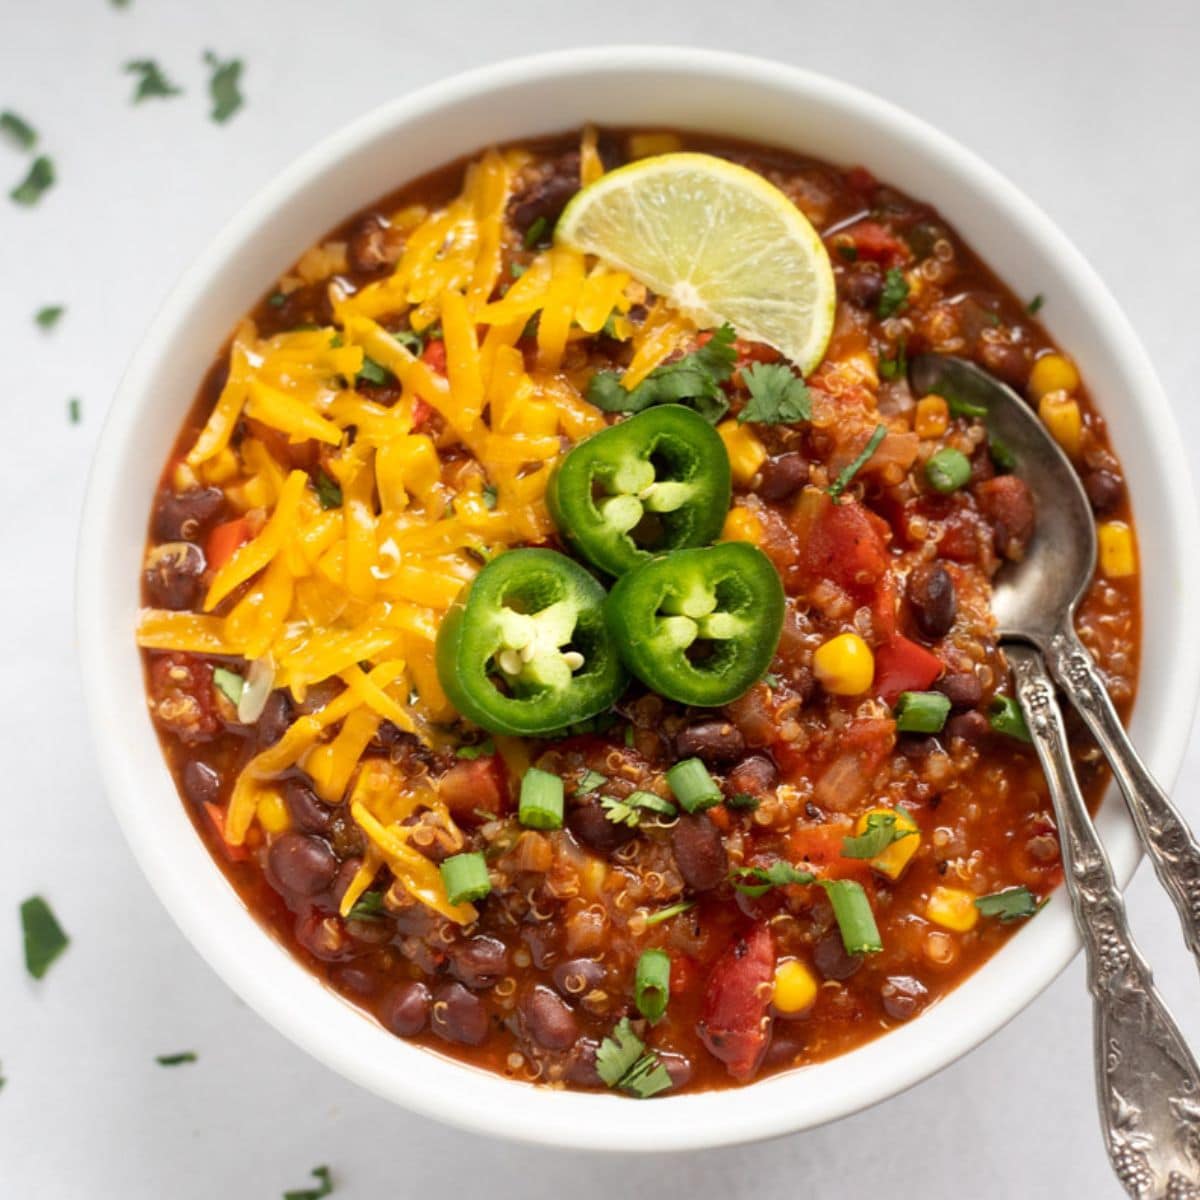 Easy Instant Pot Vegetarian Chili with Quinoa - Piping Pot Curry